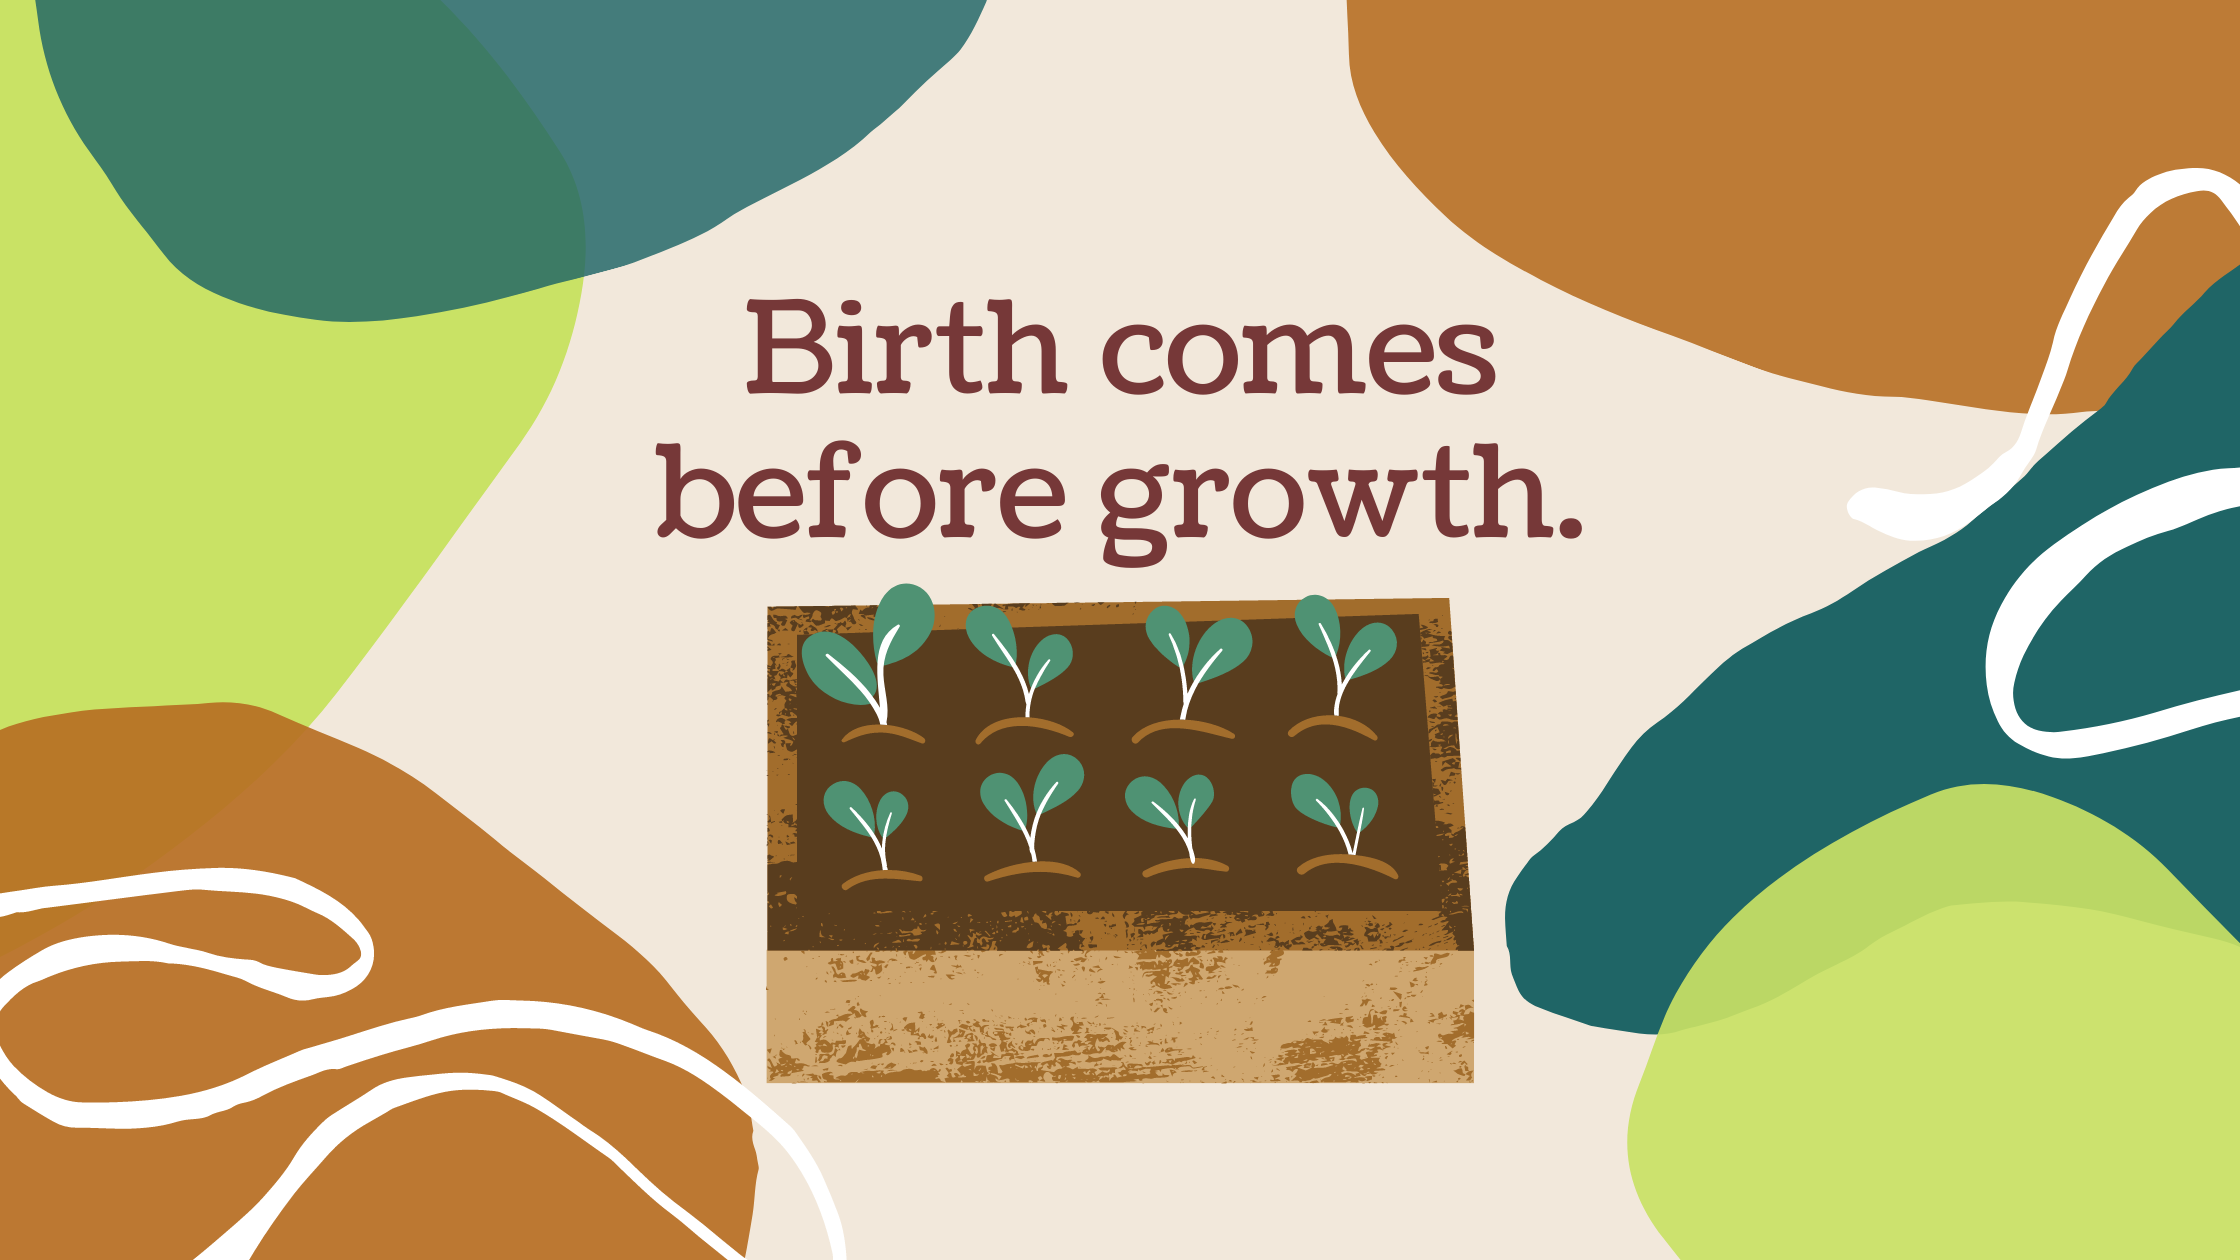 Birth comes before growth